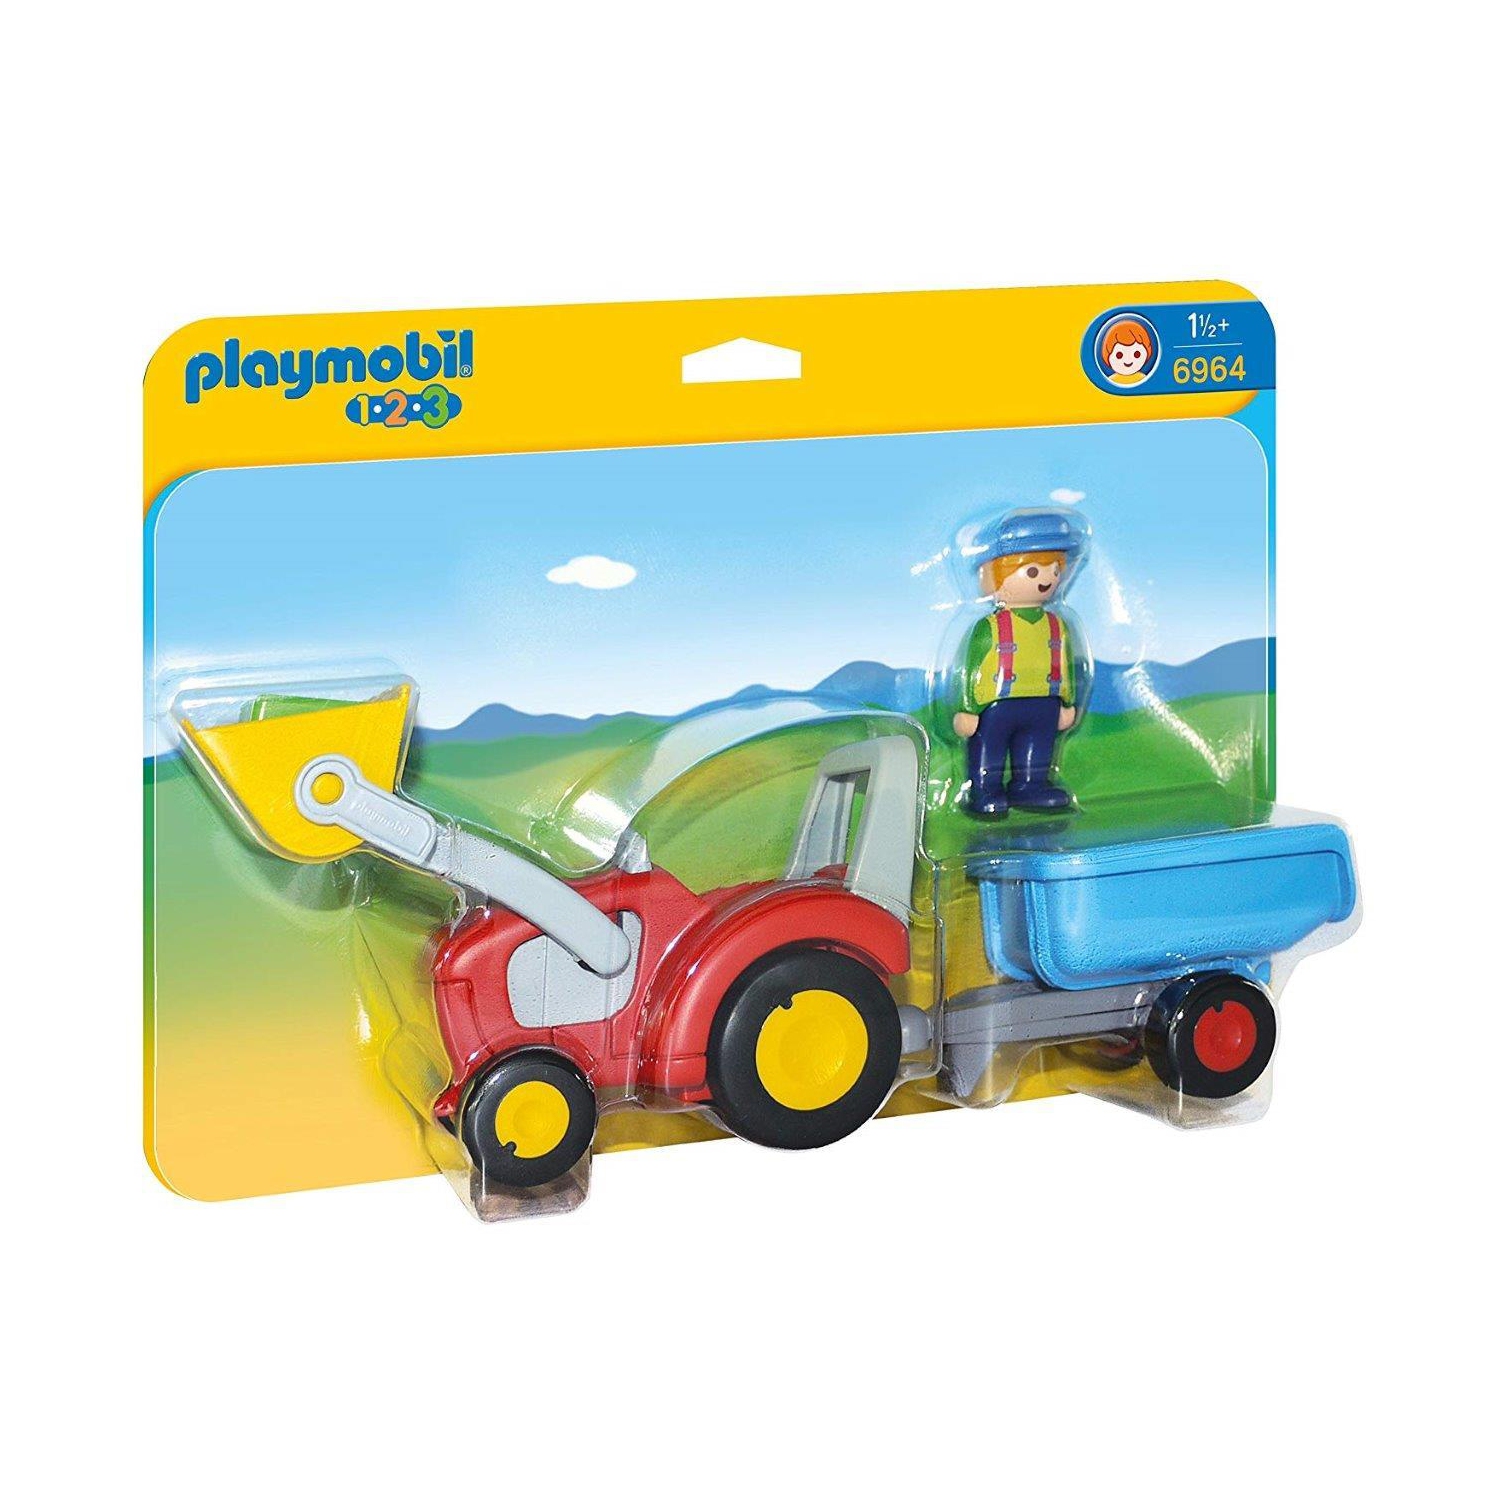 Playmobil 1-2-3: Tractor With Trailer